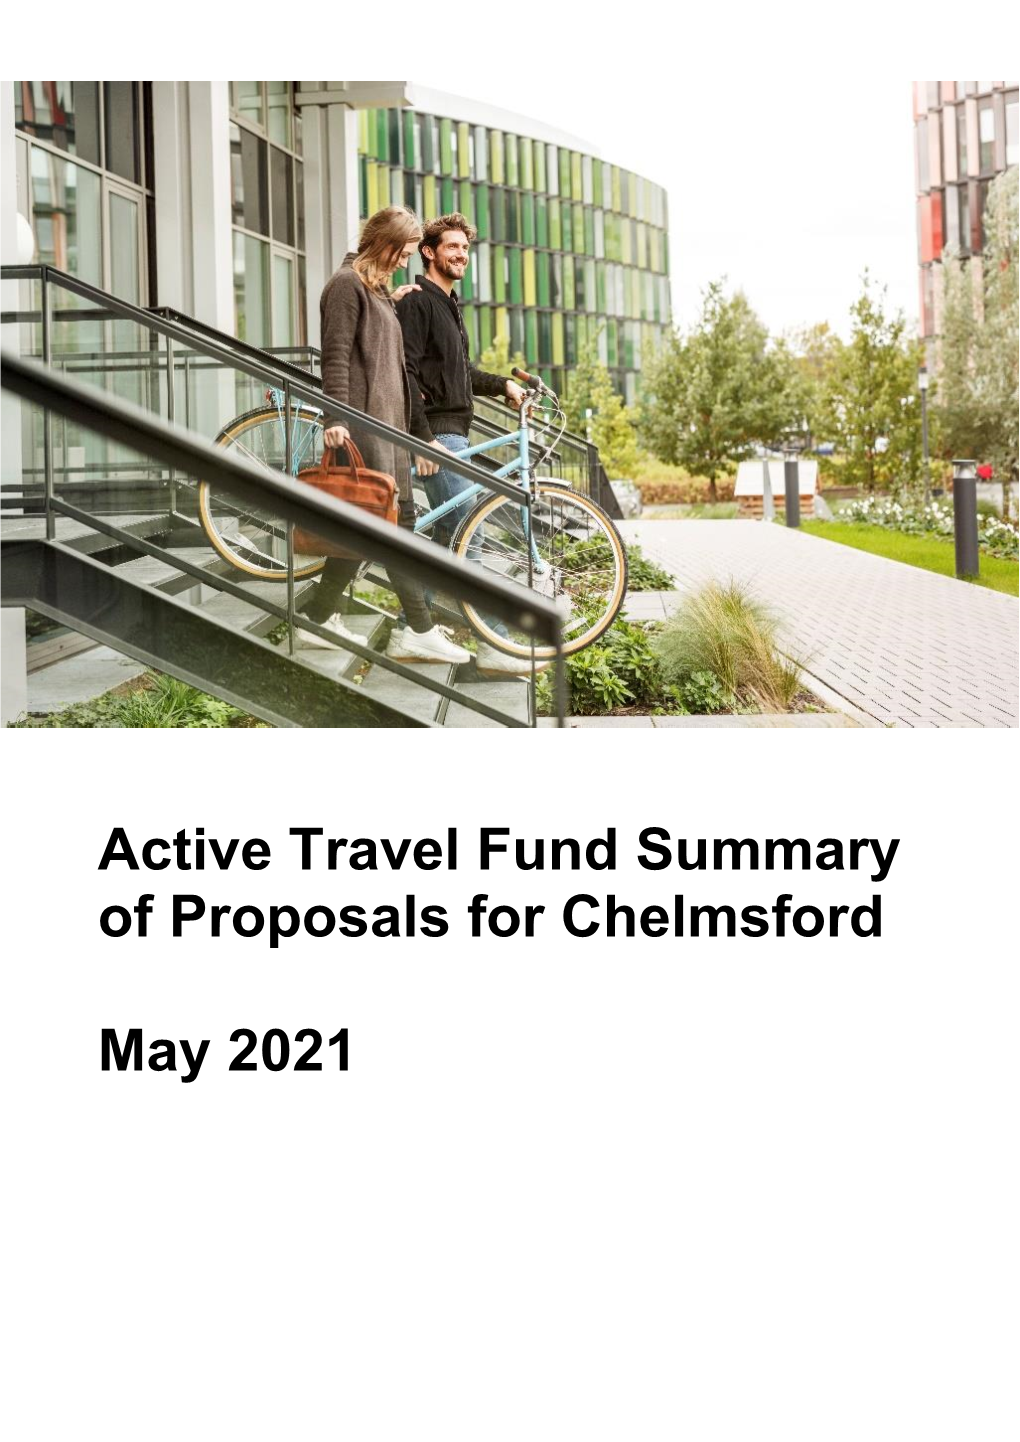 ATF Chelmsford Summary of Proposals May 2021